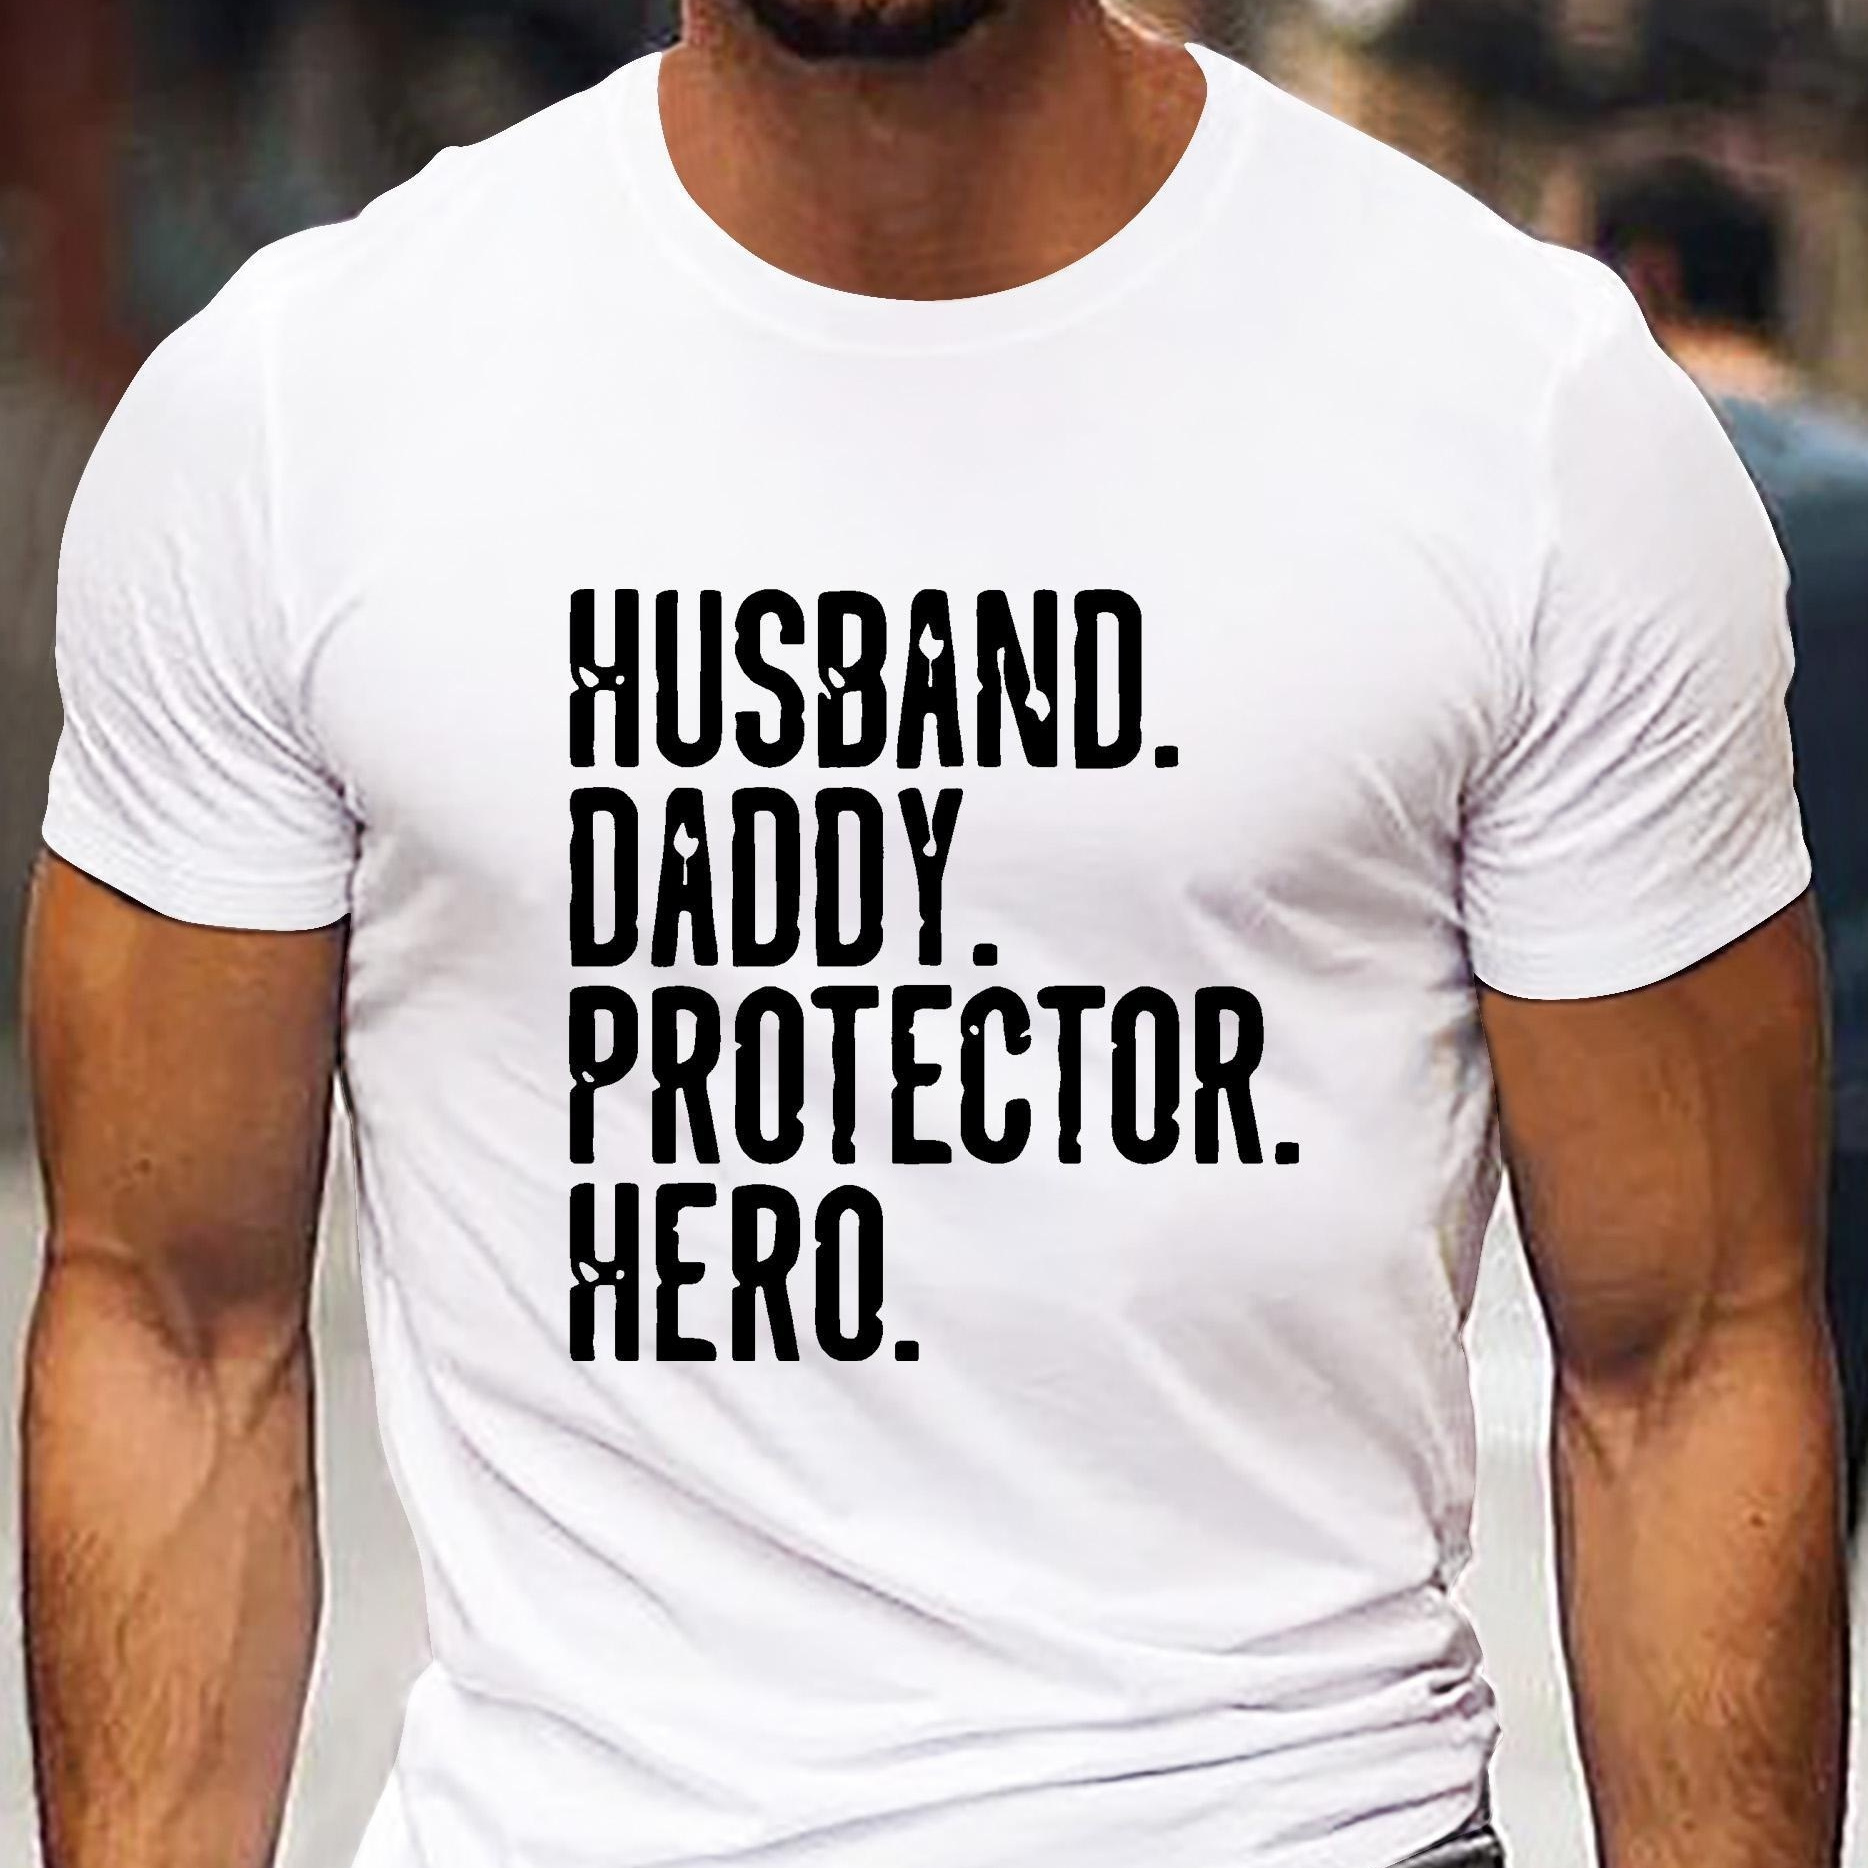 

Husband Daddy Protector Hero Words Print Short Sleeve T-shirt For Men, Casual Crew Neck Top, Comfy Versatile & Lightweight Summer Clothing For Daily Wear